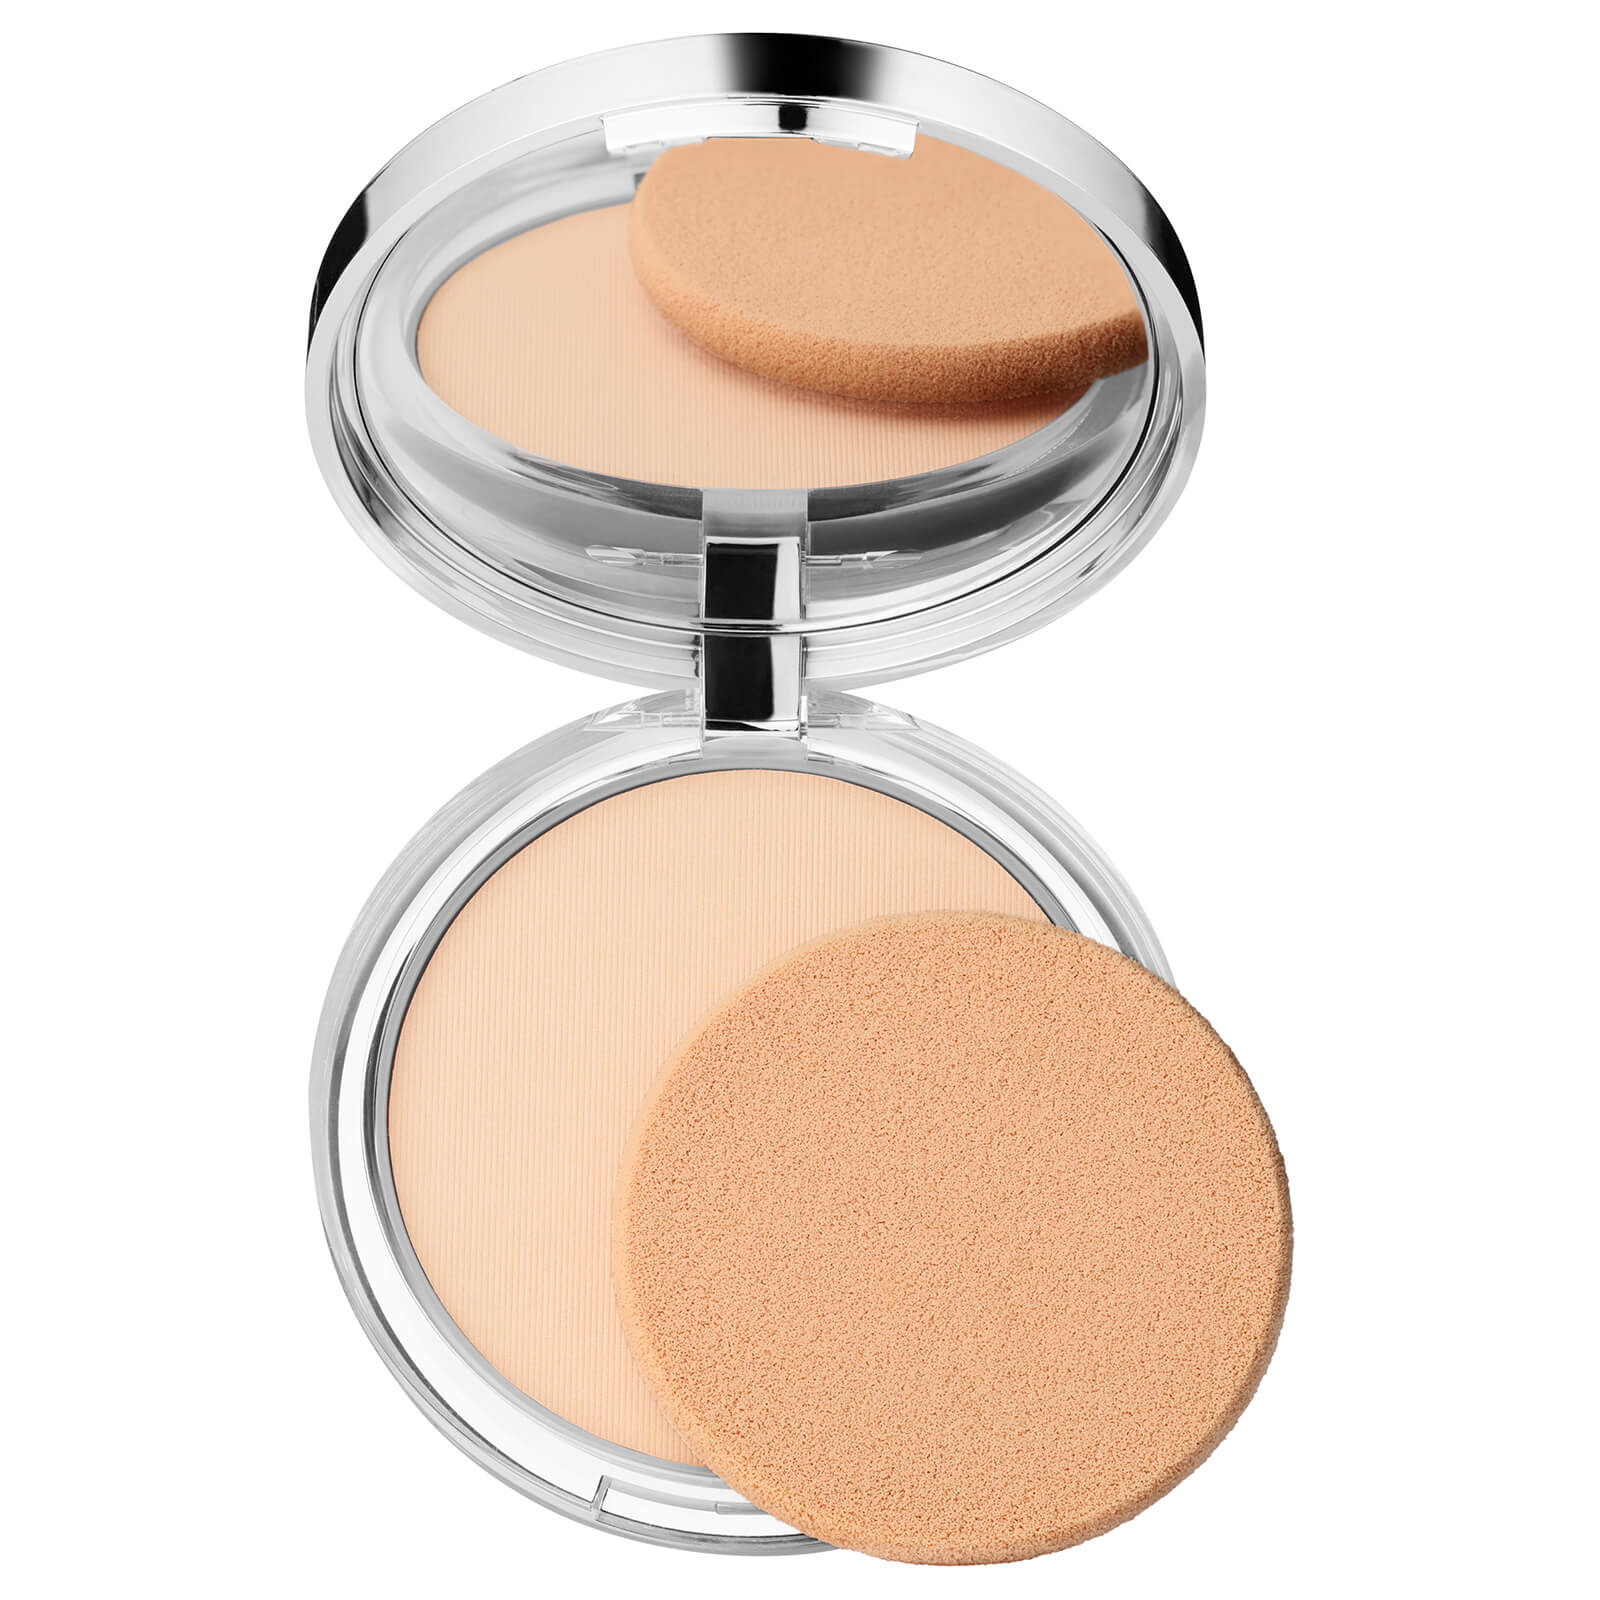 Clinique Stay-Matte Sheer Pressed Powder Oil-Free 7.6g (Various Shades) - Stay Buff